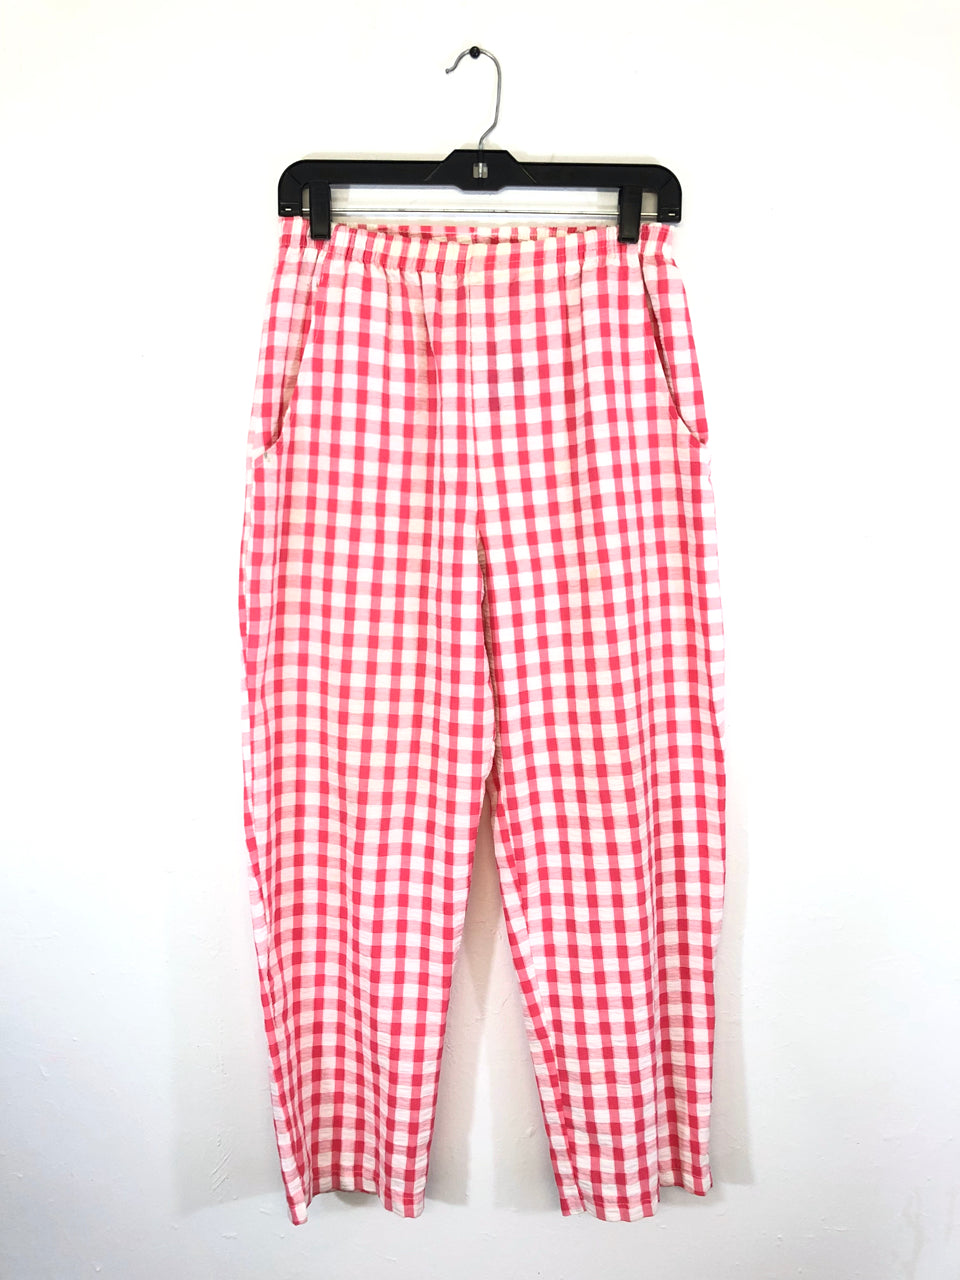 Andrew McMullan Pink Gingham Pants